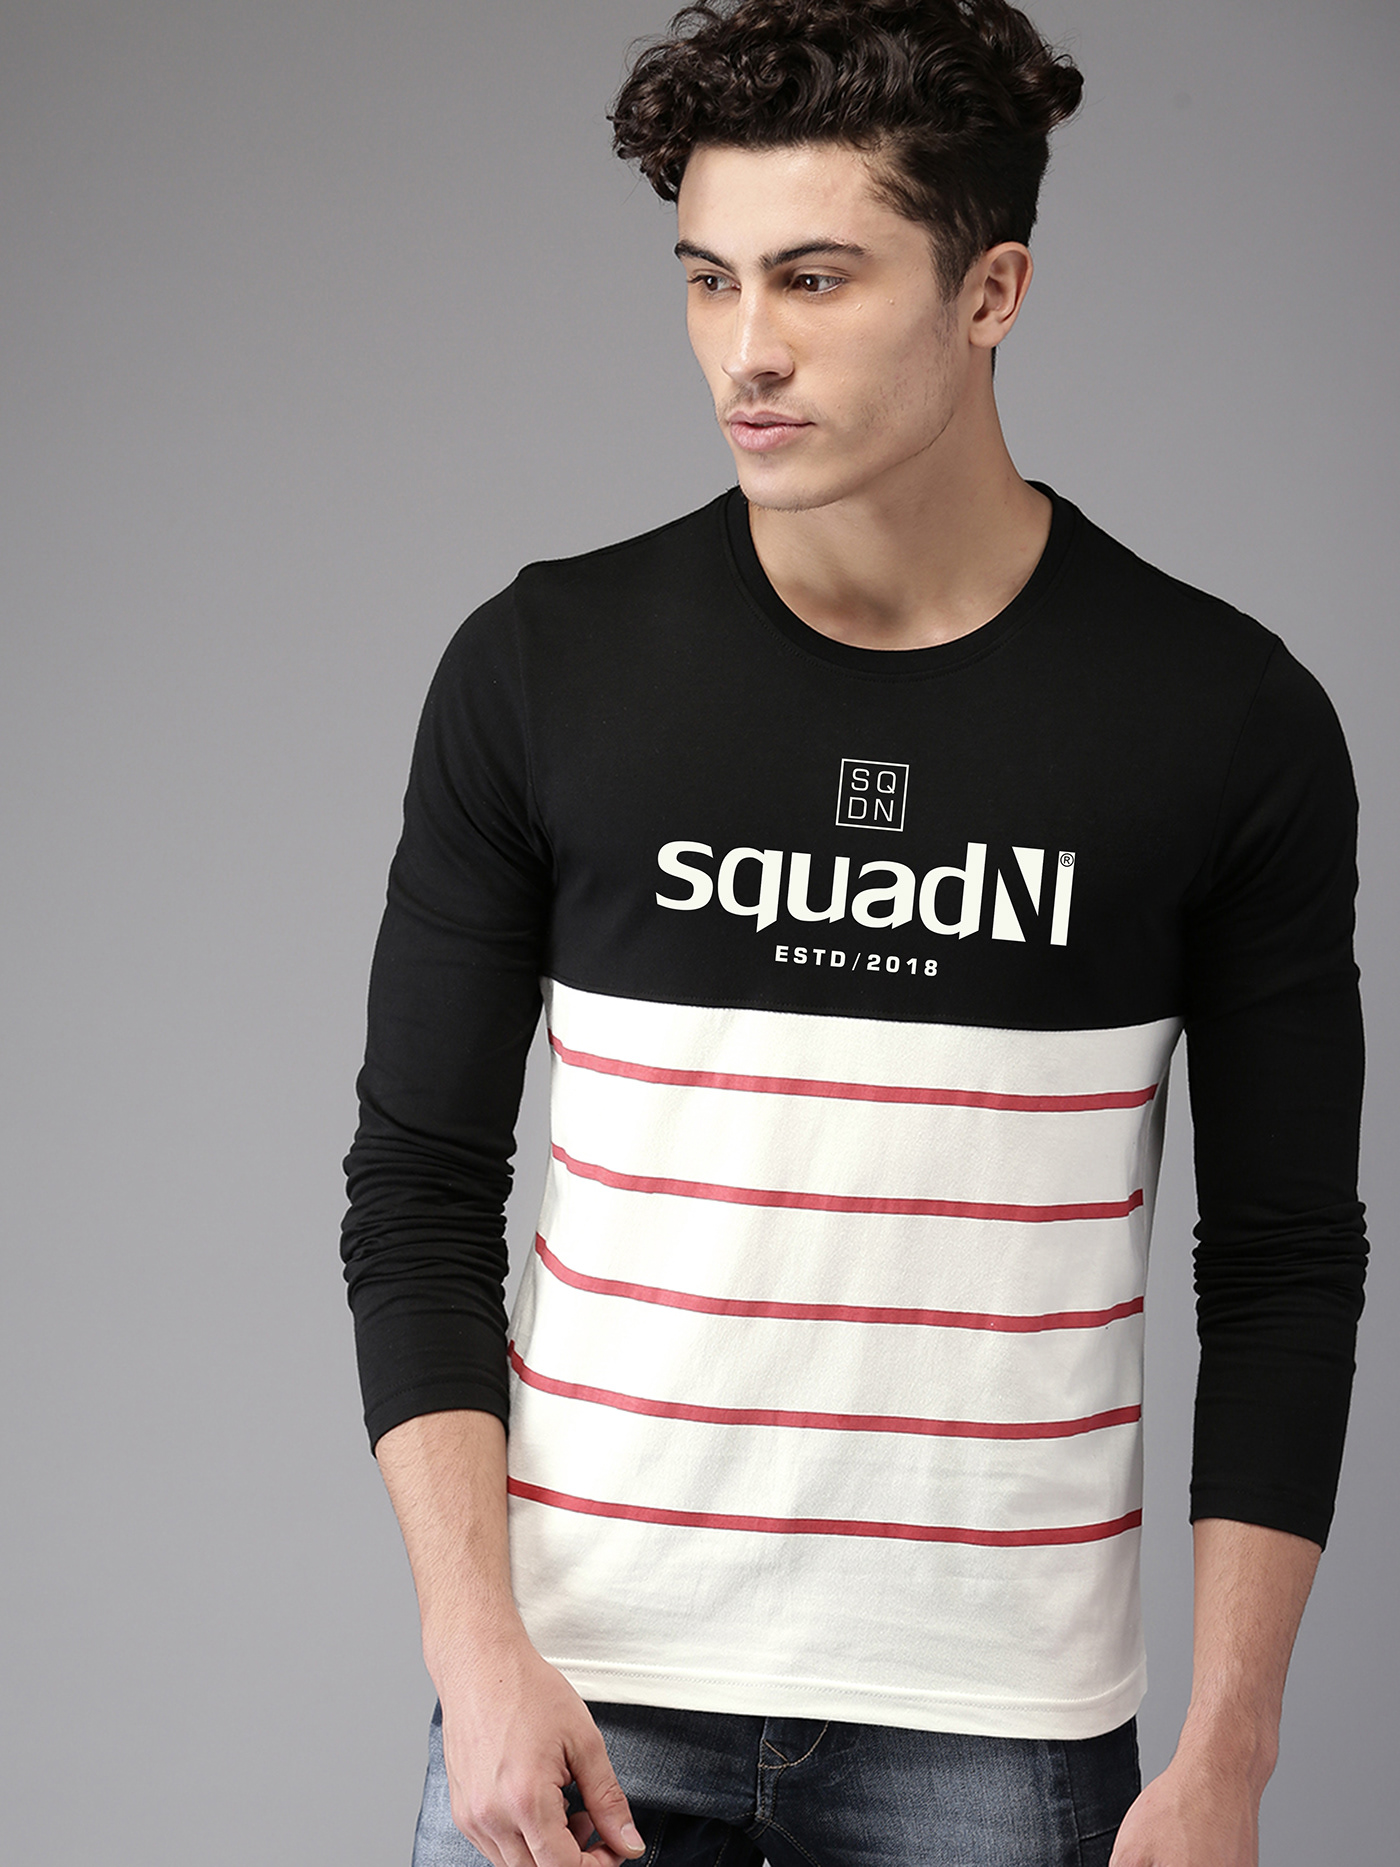 New brand Fashion Clothing men brand exclusive collection registered trademark